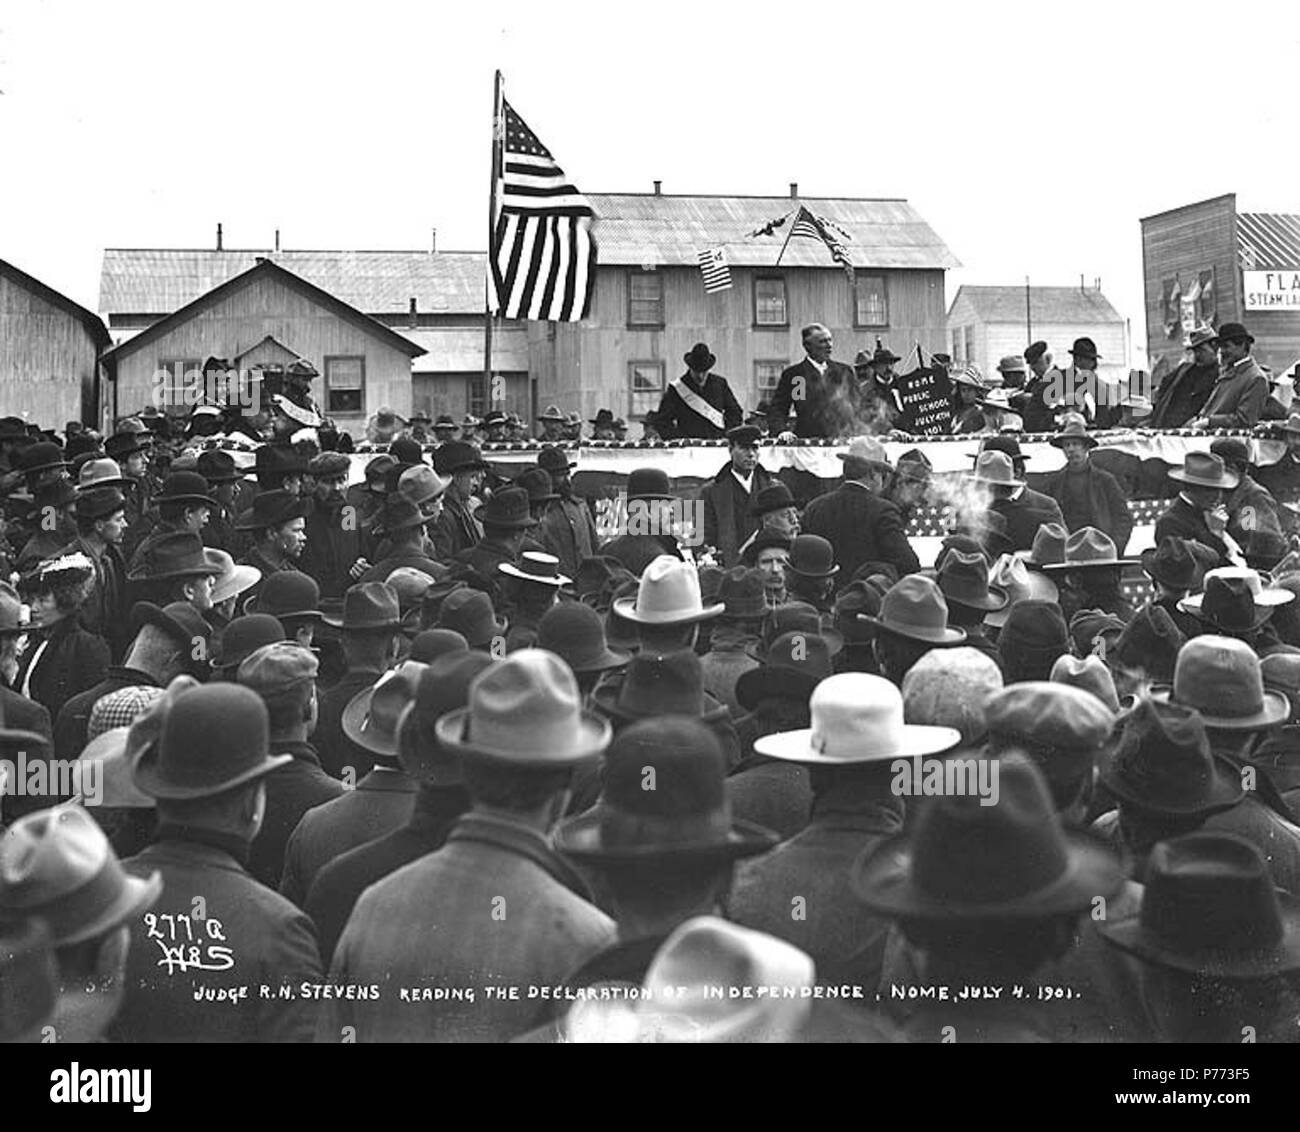 . English: Judge R.N. Stevens reading the Declaration of Independence to a crowd during the July 4th celebration, Nome, Alaska, 1901. English: Caption on image: 'Judge R.N. Stevens reading the Declaration of Independence, Nome, July 4, 1901.' Original image in Hegg Album 5, page 8 . Original photograph by Eric A. Hegg 1832; copied by Webster and Stevens 277.A Subjects (LCTGM): Fourth of July celebrations--Alaska--Nome Subjects (LCSH): Stevens, R. N.  . 1901 6 Judge RN Stevens reading the Declaration of Independence to a crowd during the July 4th celebration, Nome, Alaska, 1901 (HEGG 407) Stock Photo